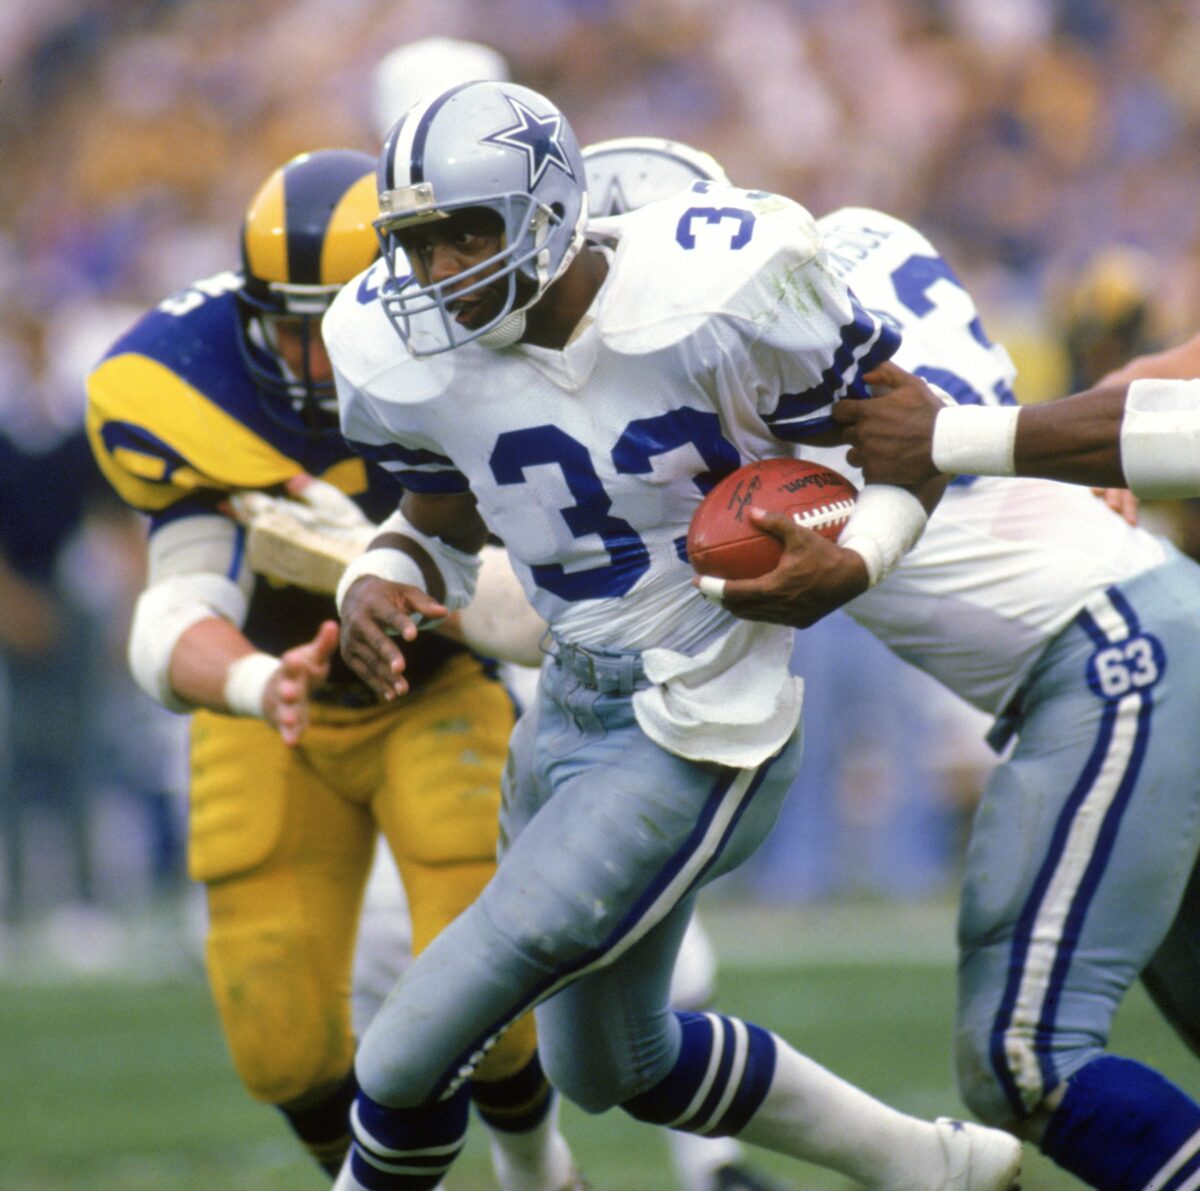 Cowboys legends Tony Dorsett, Drew Pearson team with Washington rival for special HS practice